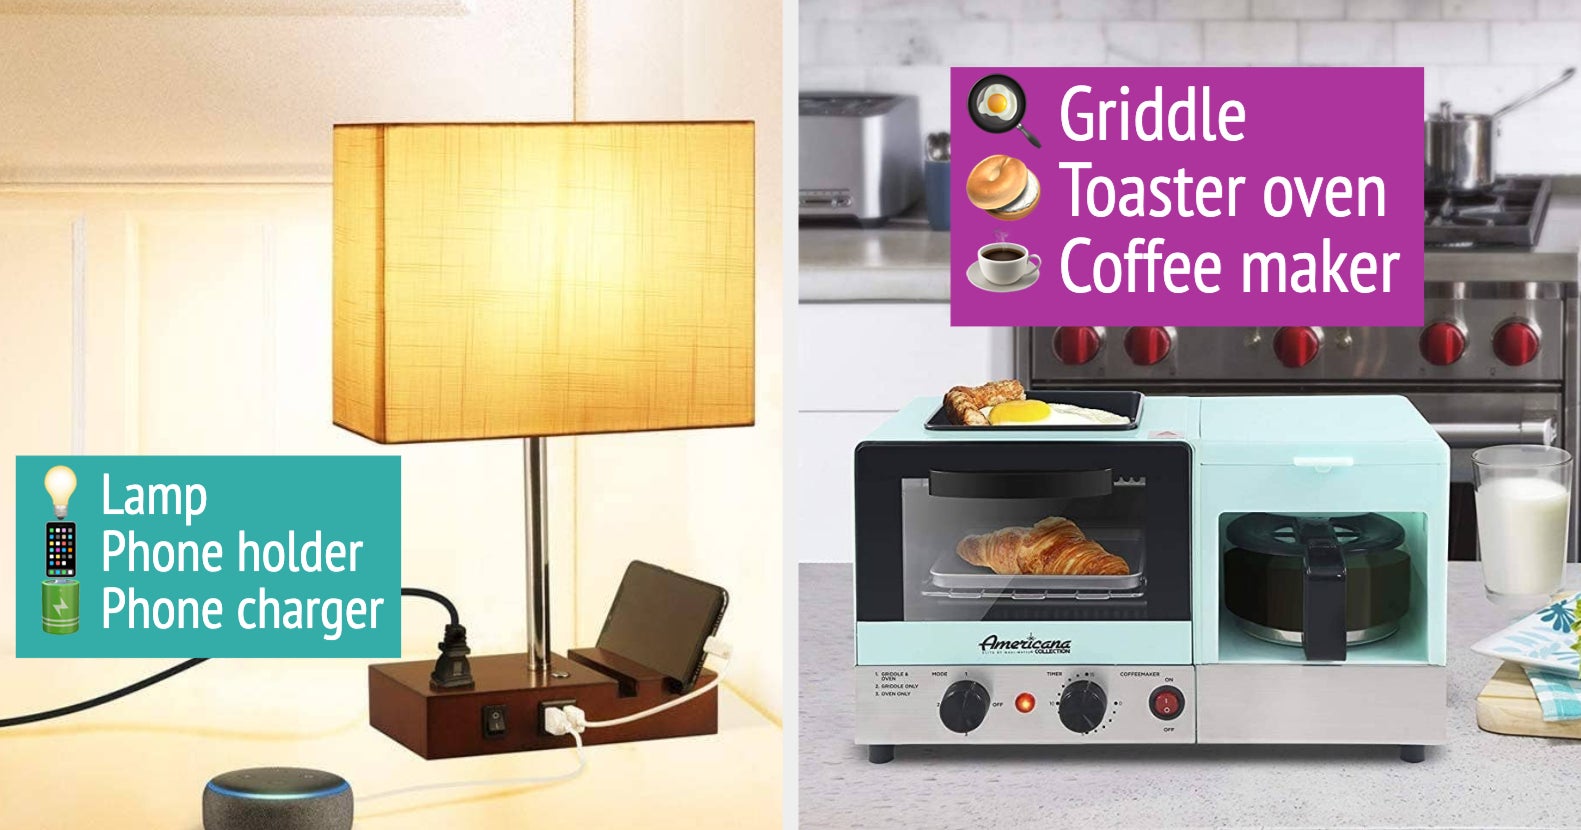 More Than 8,900  Shoppers Swear By This Compact, Retro Toaster